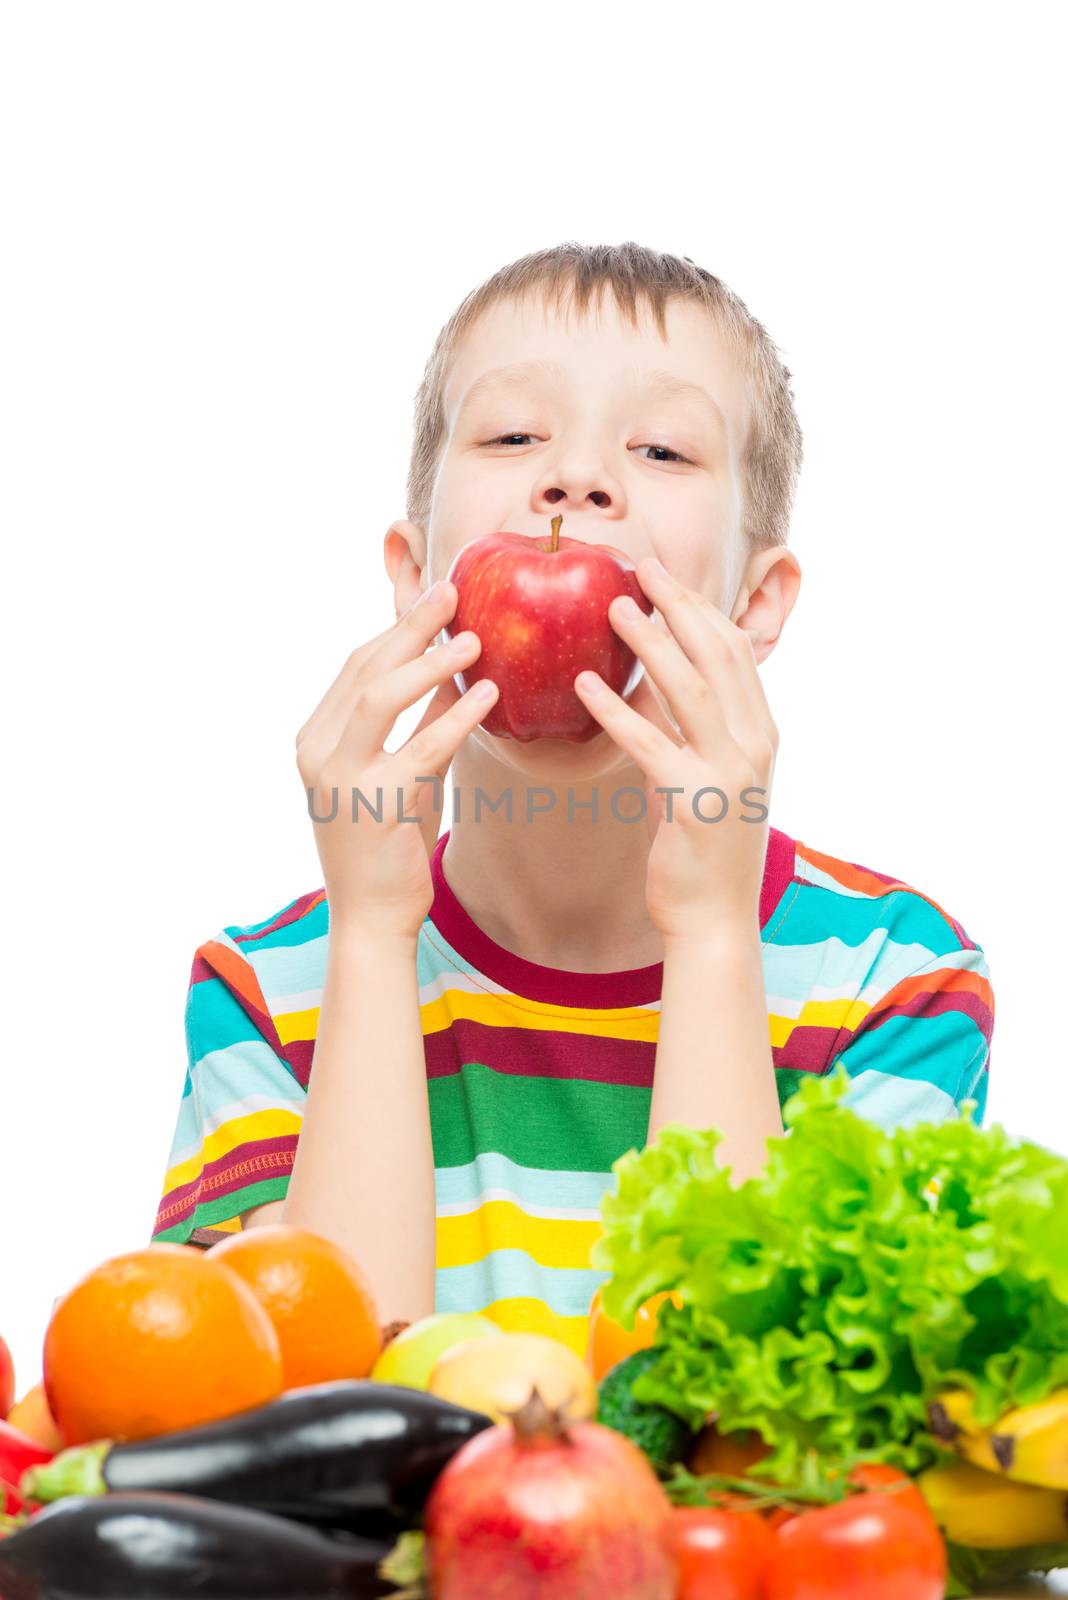 The boy eats a red juicy apple, portrait on a white background by kosmsos111